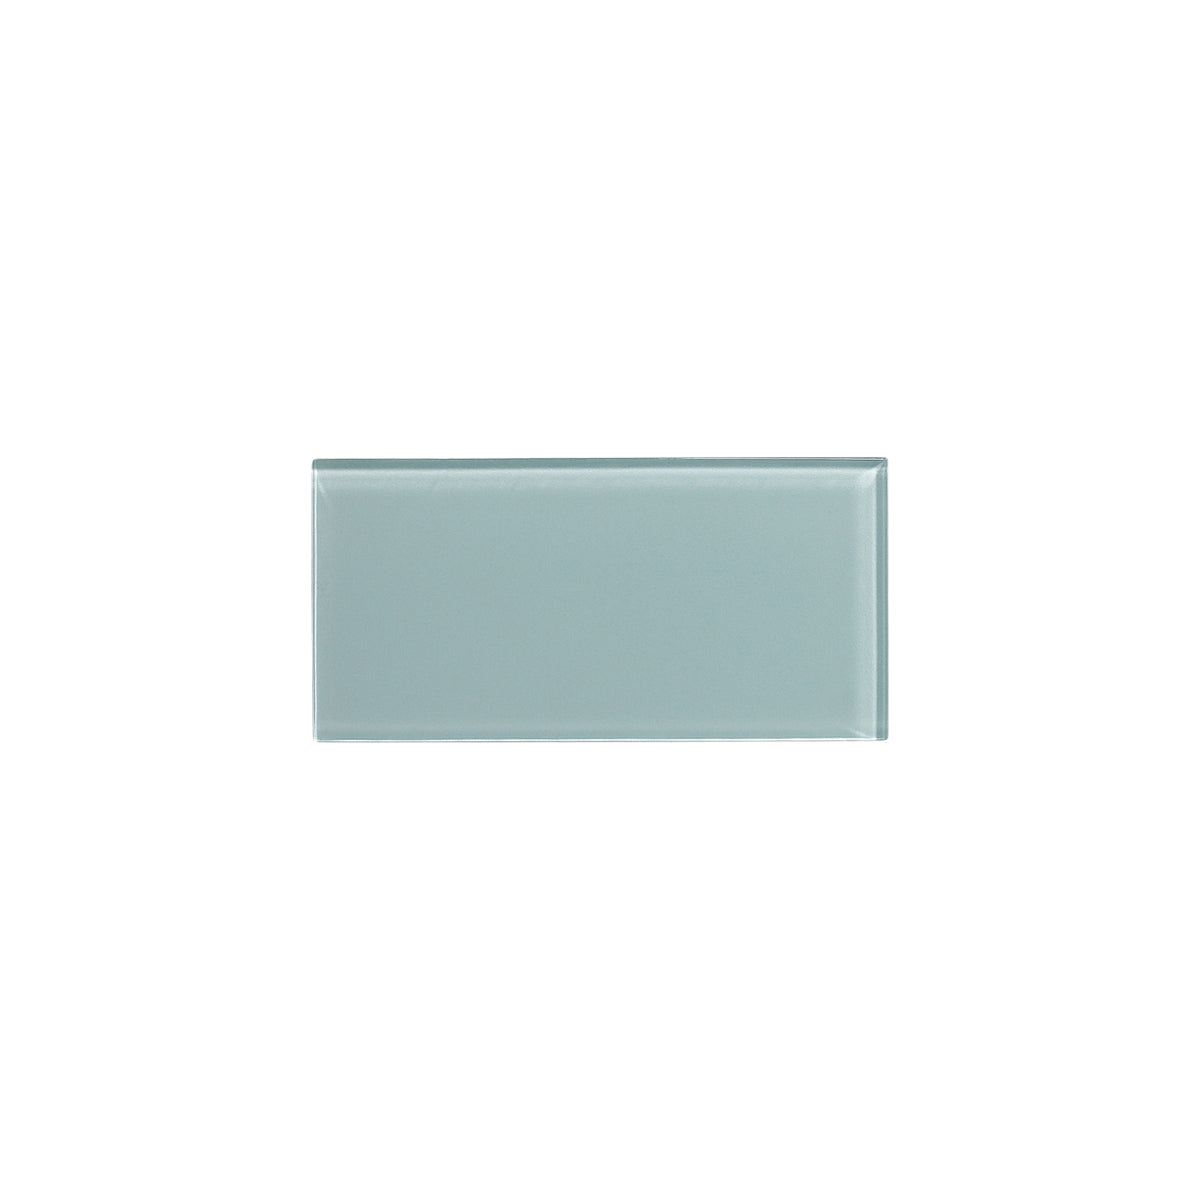 Lungarno - Urban Textures Contempo 3 in. x 6 in. Wall Tile - Sky Blue